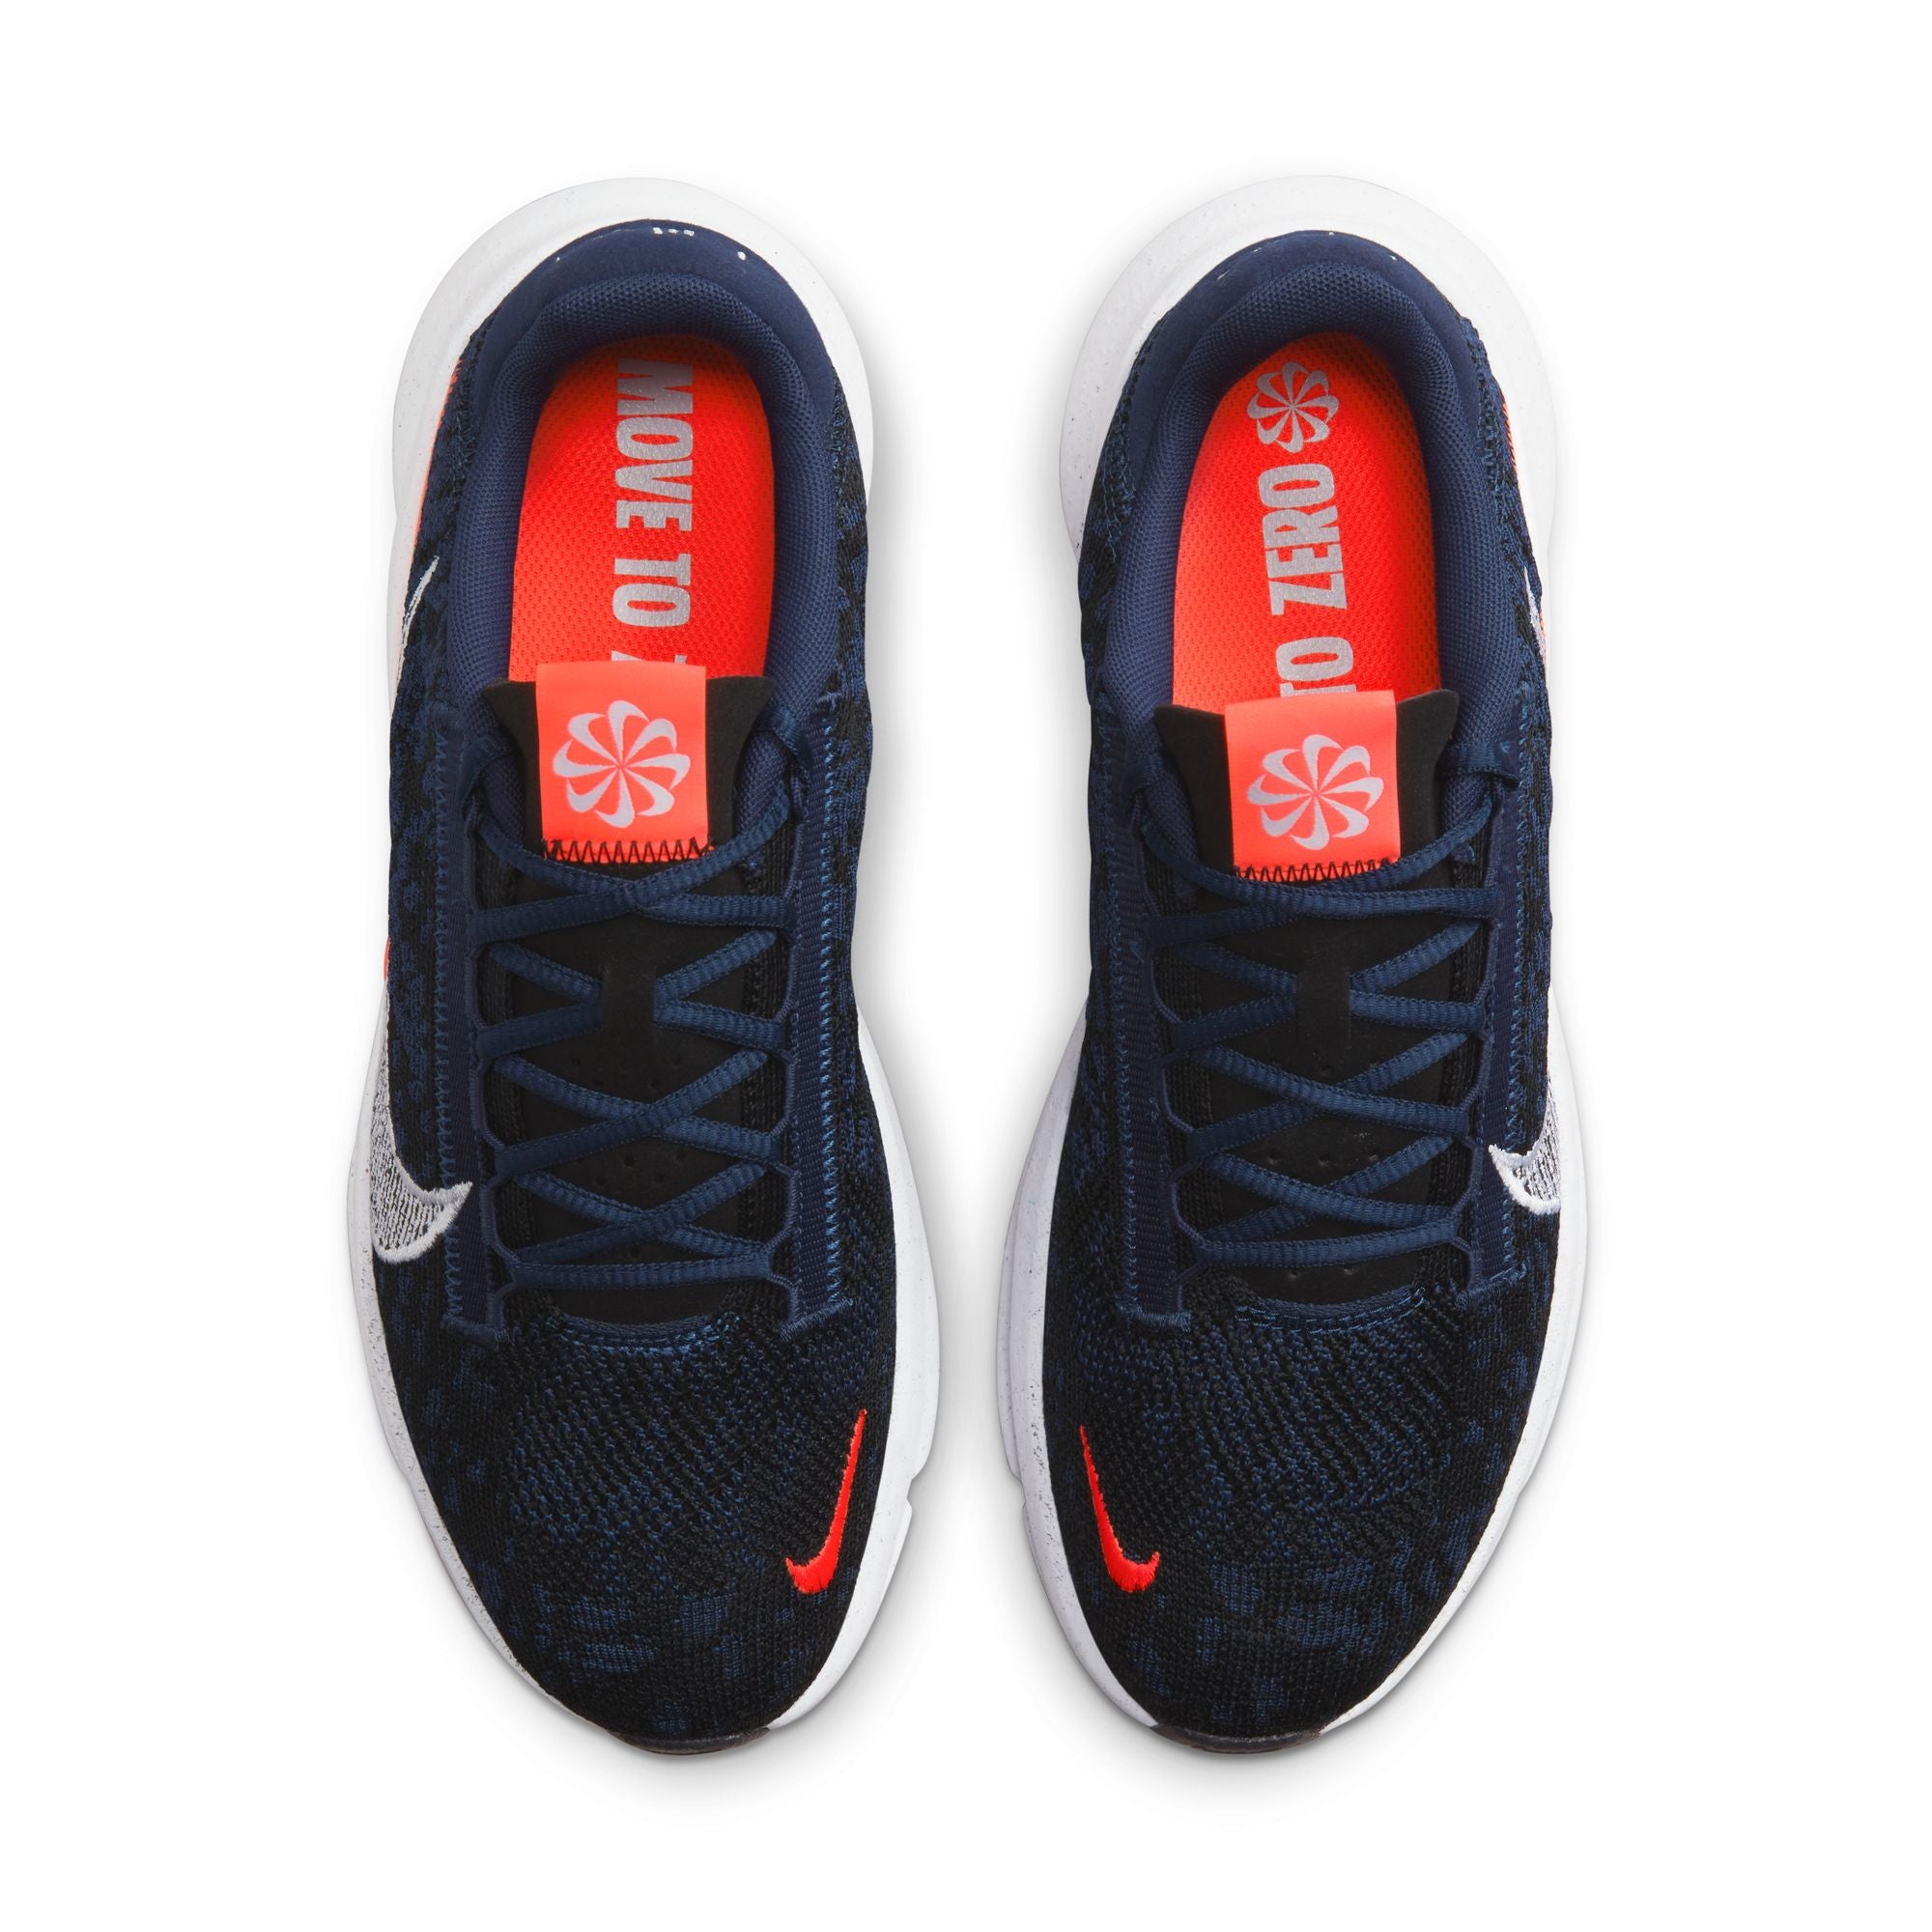 NIKE SUPERREP GO 3 NEXT NATURE FLYKNIT MENS TRAINING SHOES COLLEGE NAVY ...